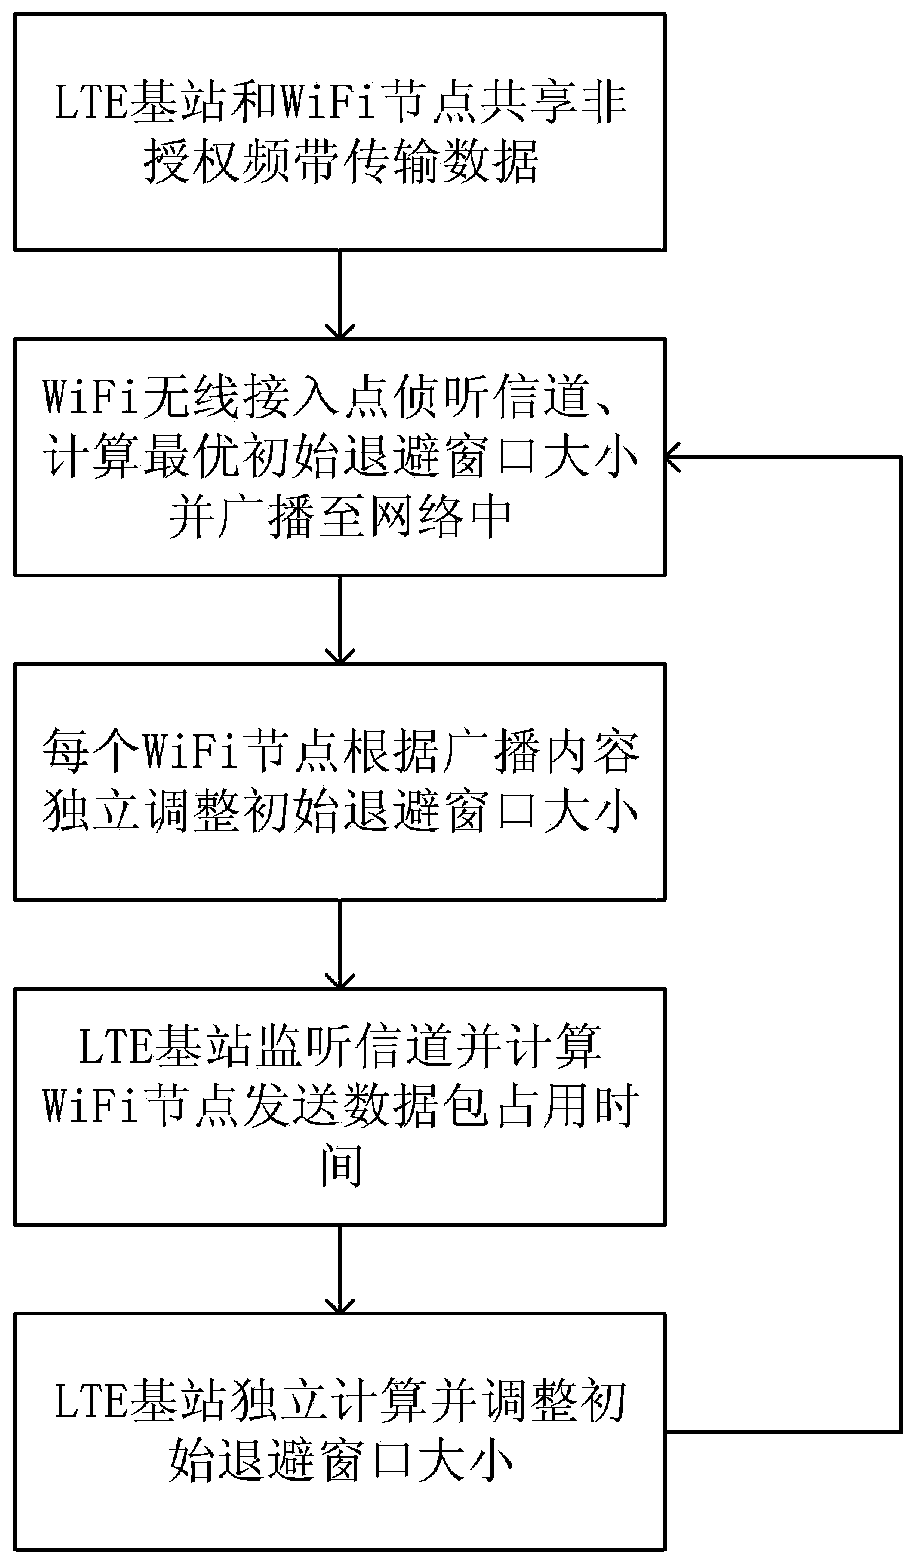 Backoff window distributed adjustment method for LTE and WiFi coexisting network